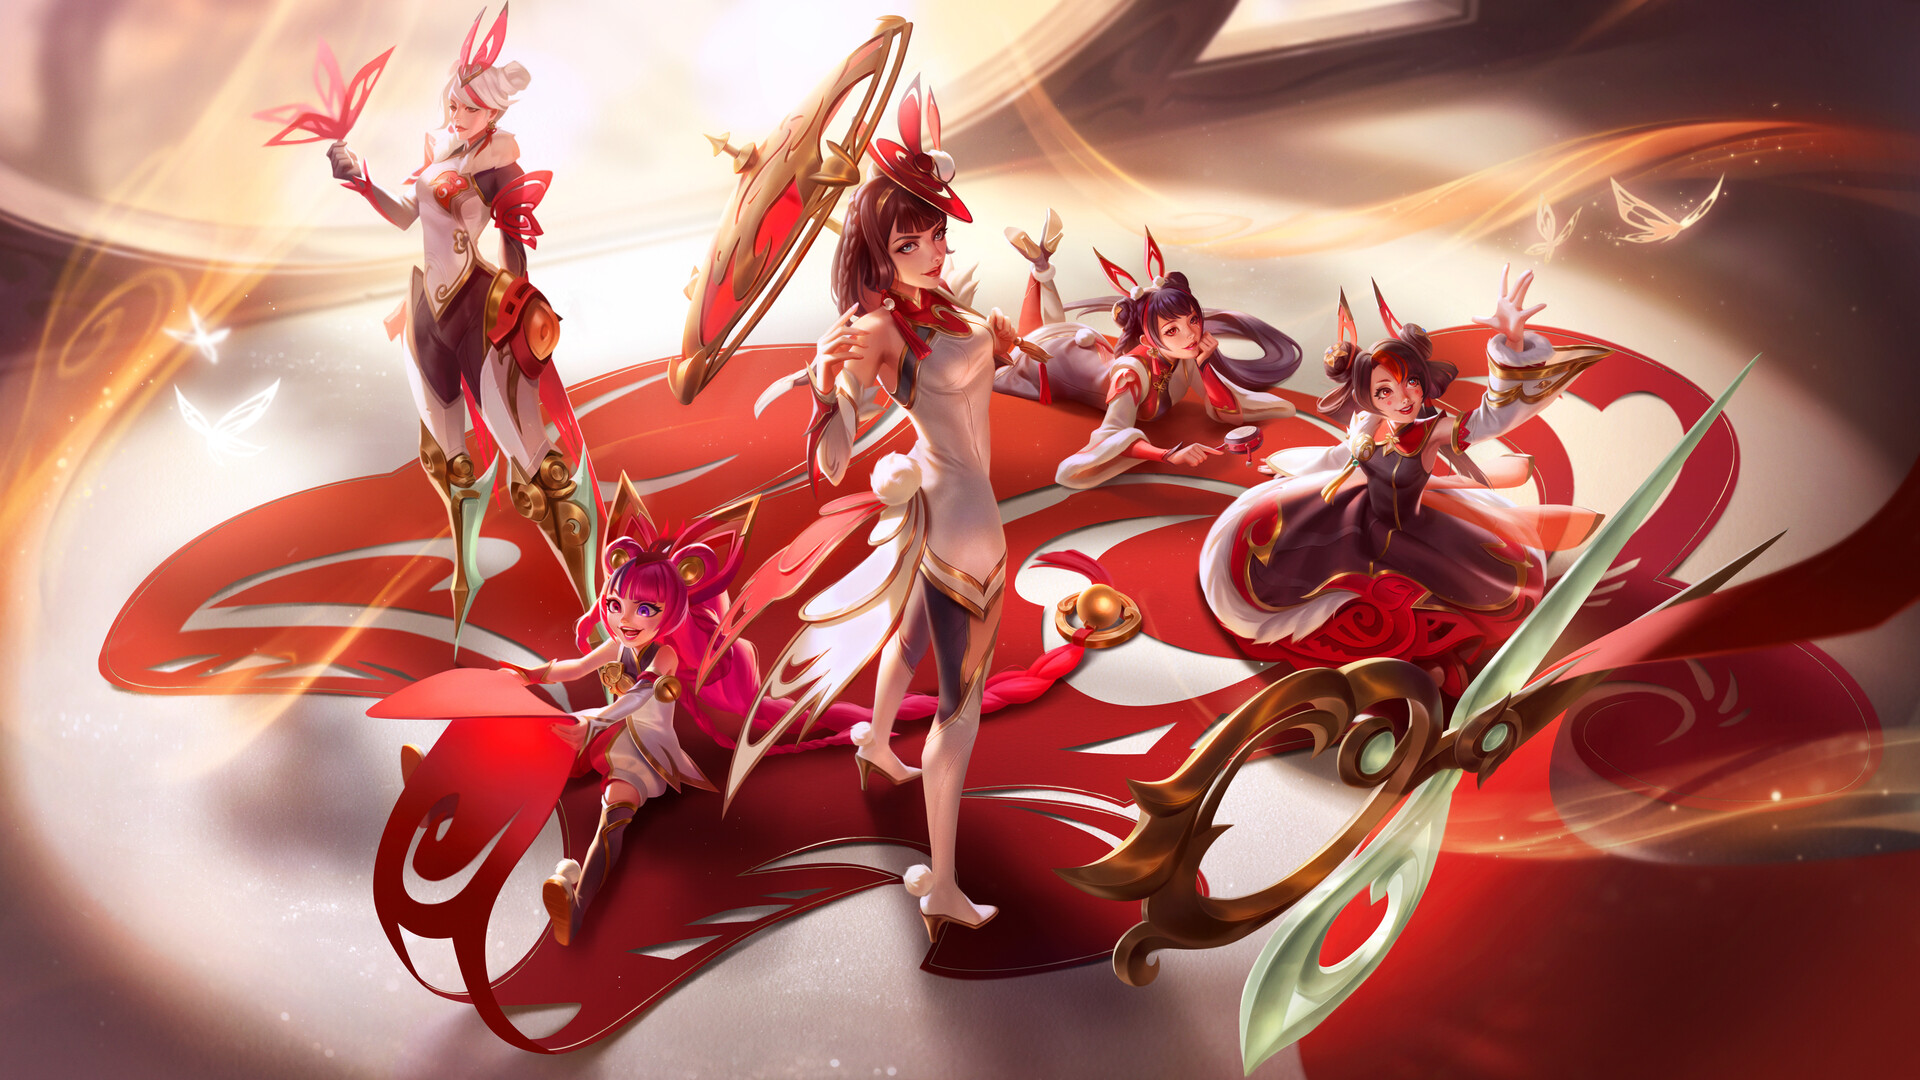 Lion Song Drawing Women League Of Legends Red Video Game Art Gold Butterfly White Clothing Video Gam 1920x1080